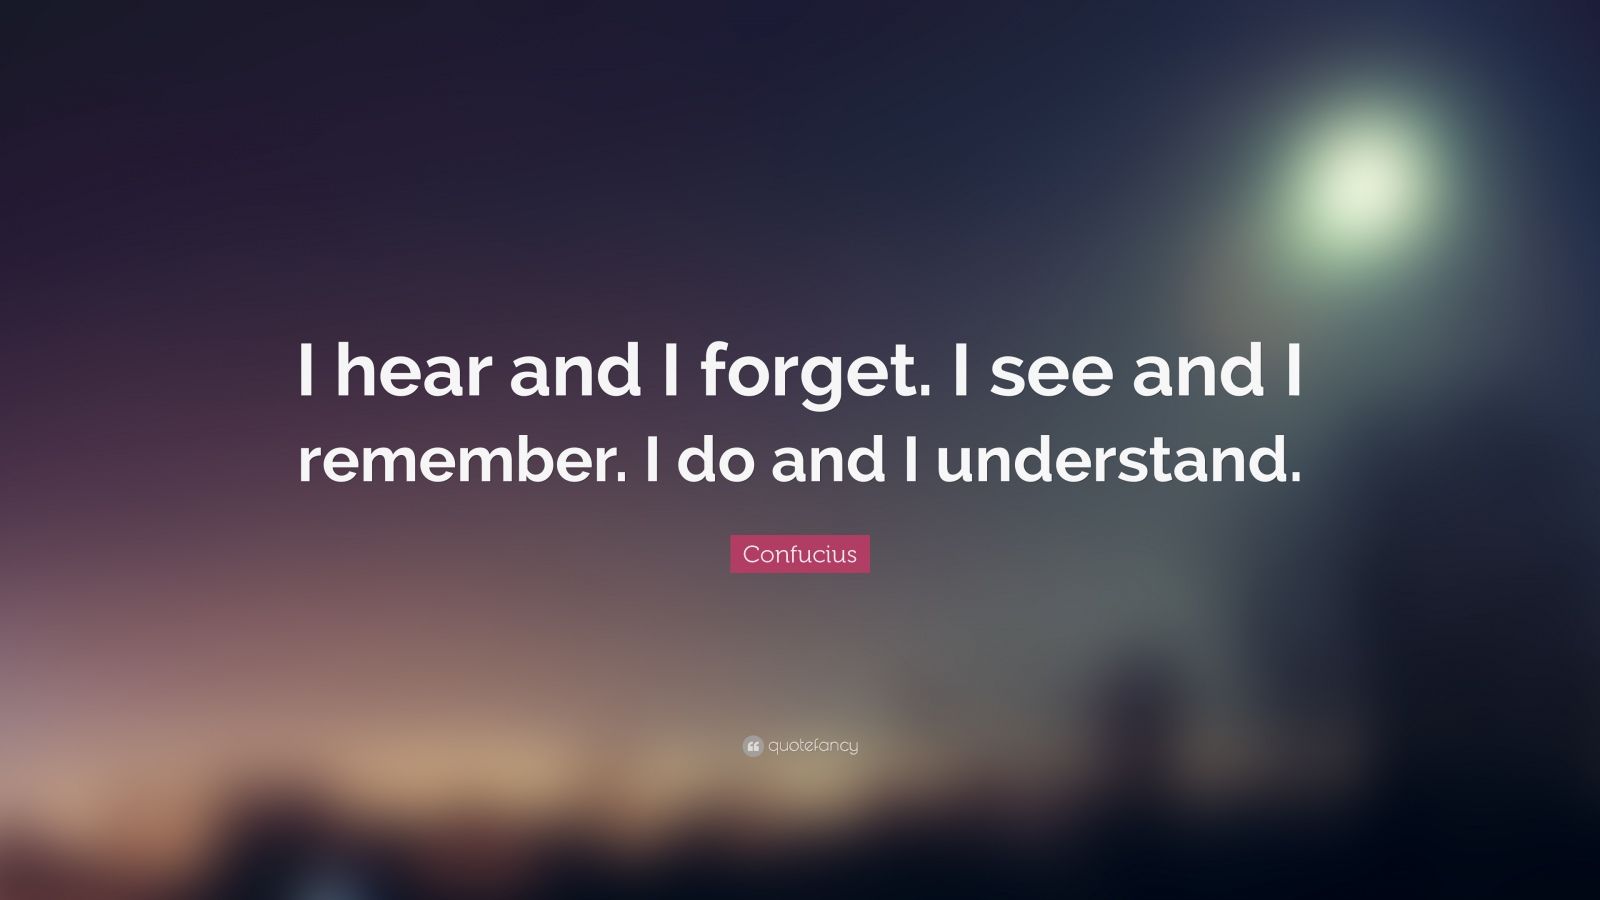 Confucius Quote: “I hear and I forget. I see and I remember. I do and I